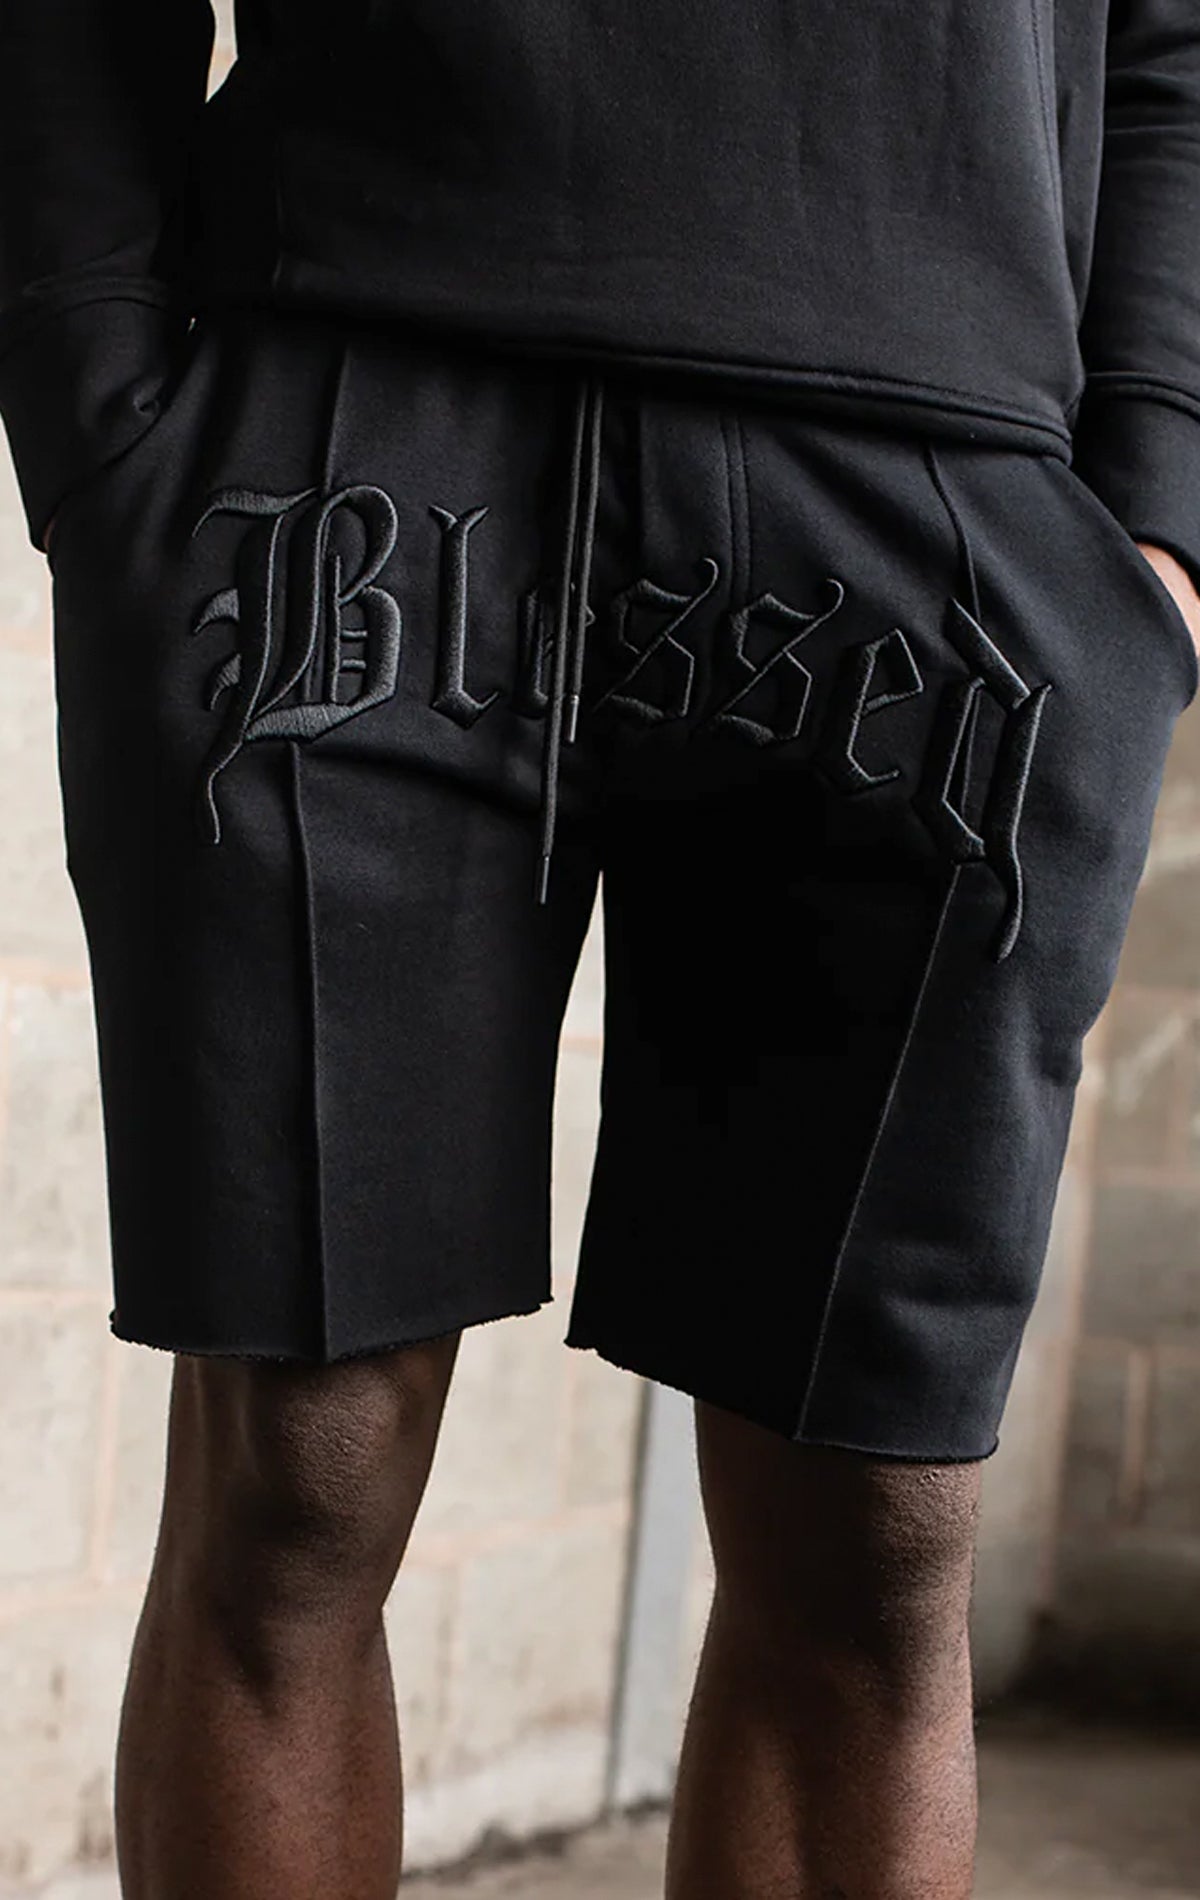 Men's casual, straight-leg shorts in black. The shorts feature a 100% cotton fabric, an arched 3D embroidered 